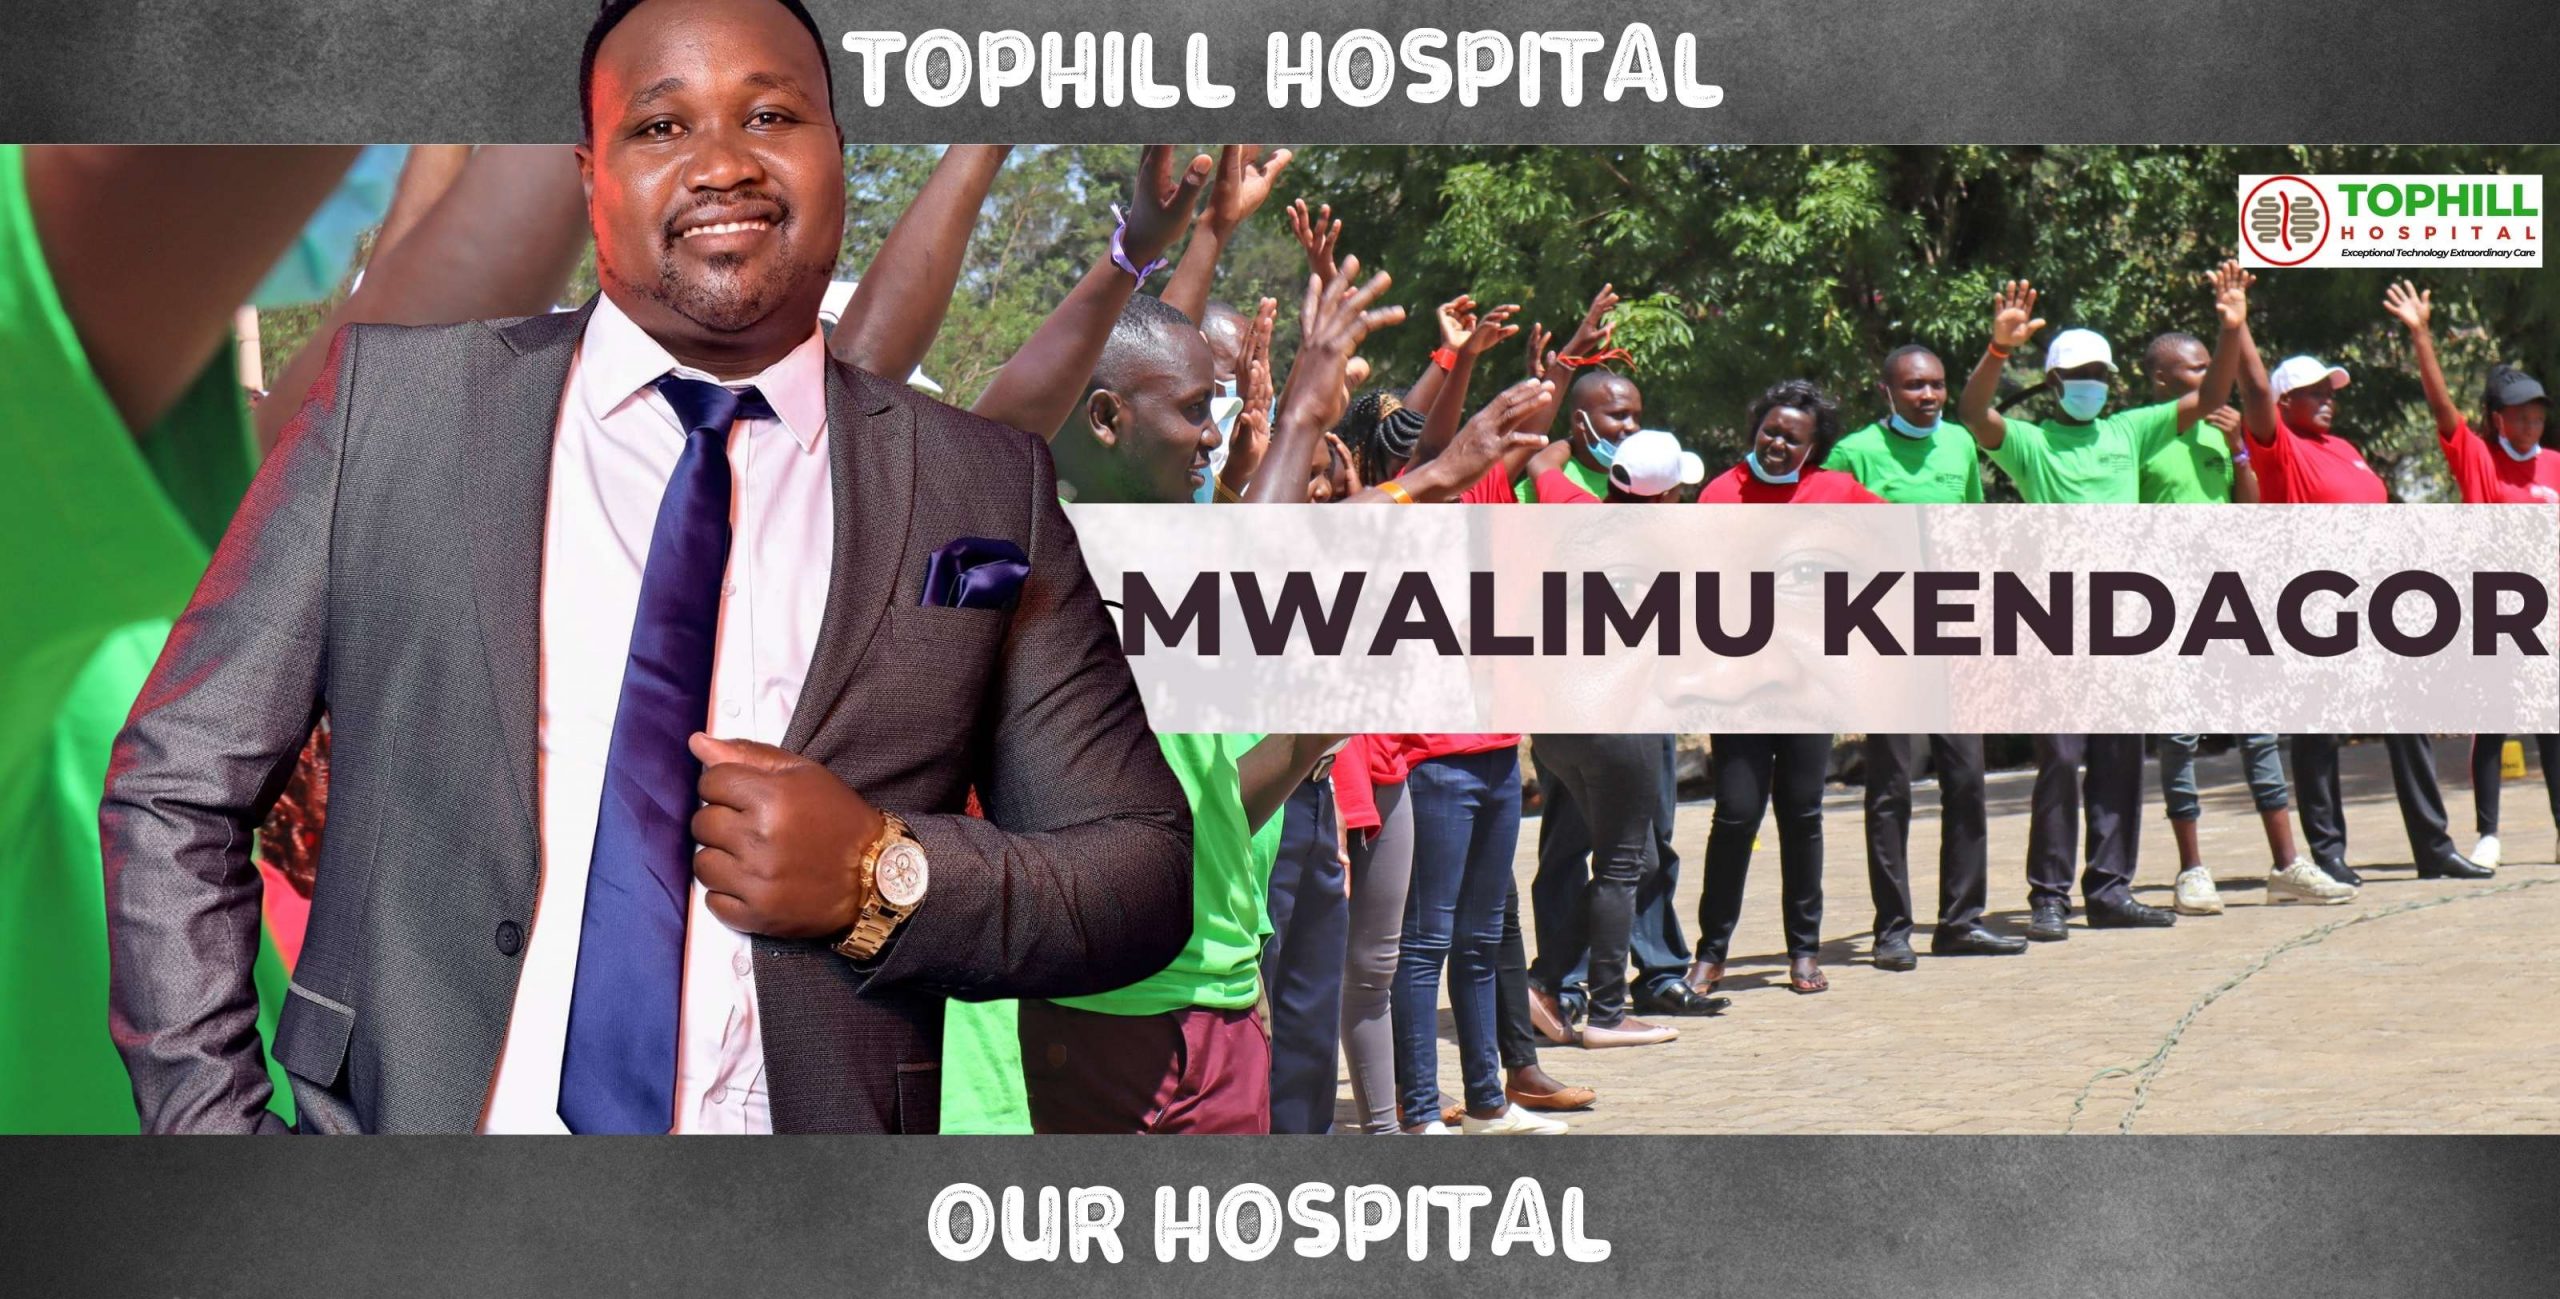 Tophill Hospital, Our Hospital by Mwalimu Kendagor